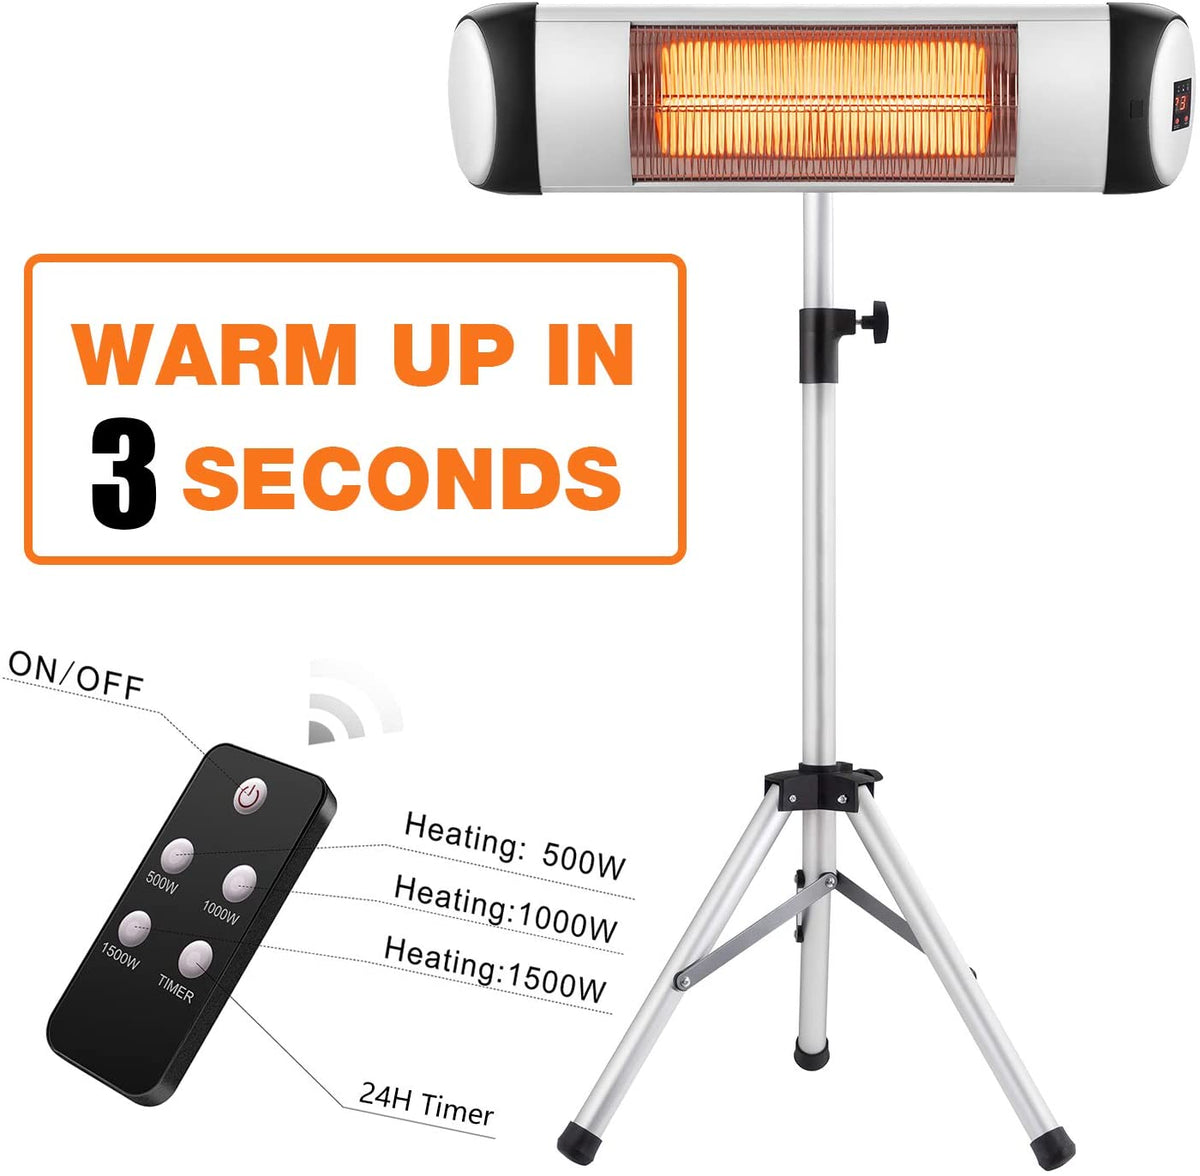 RW Flame 516B 500W-1500W Height Adjustable Waterproof IP65 Rated Infrared Electric Patio Heater With Remote New